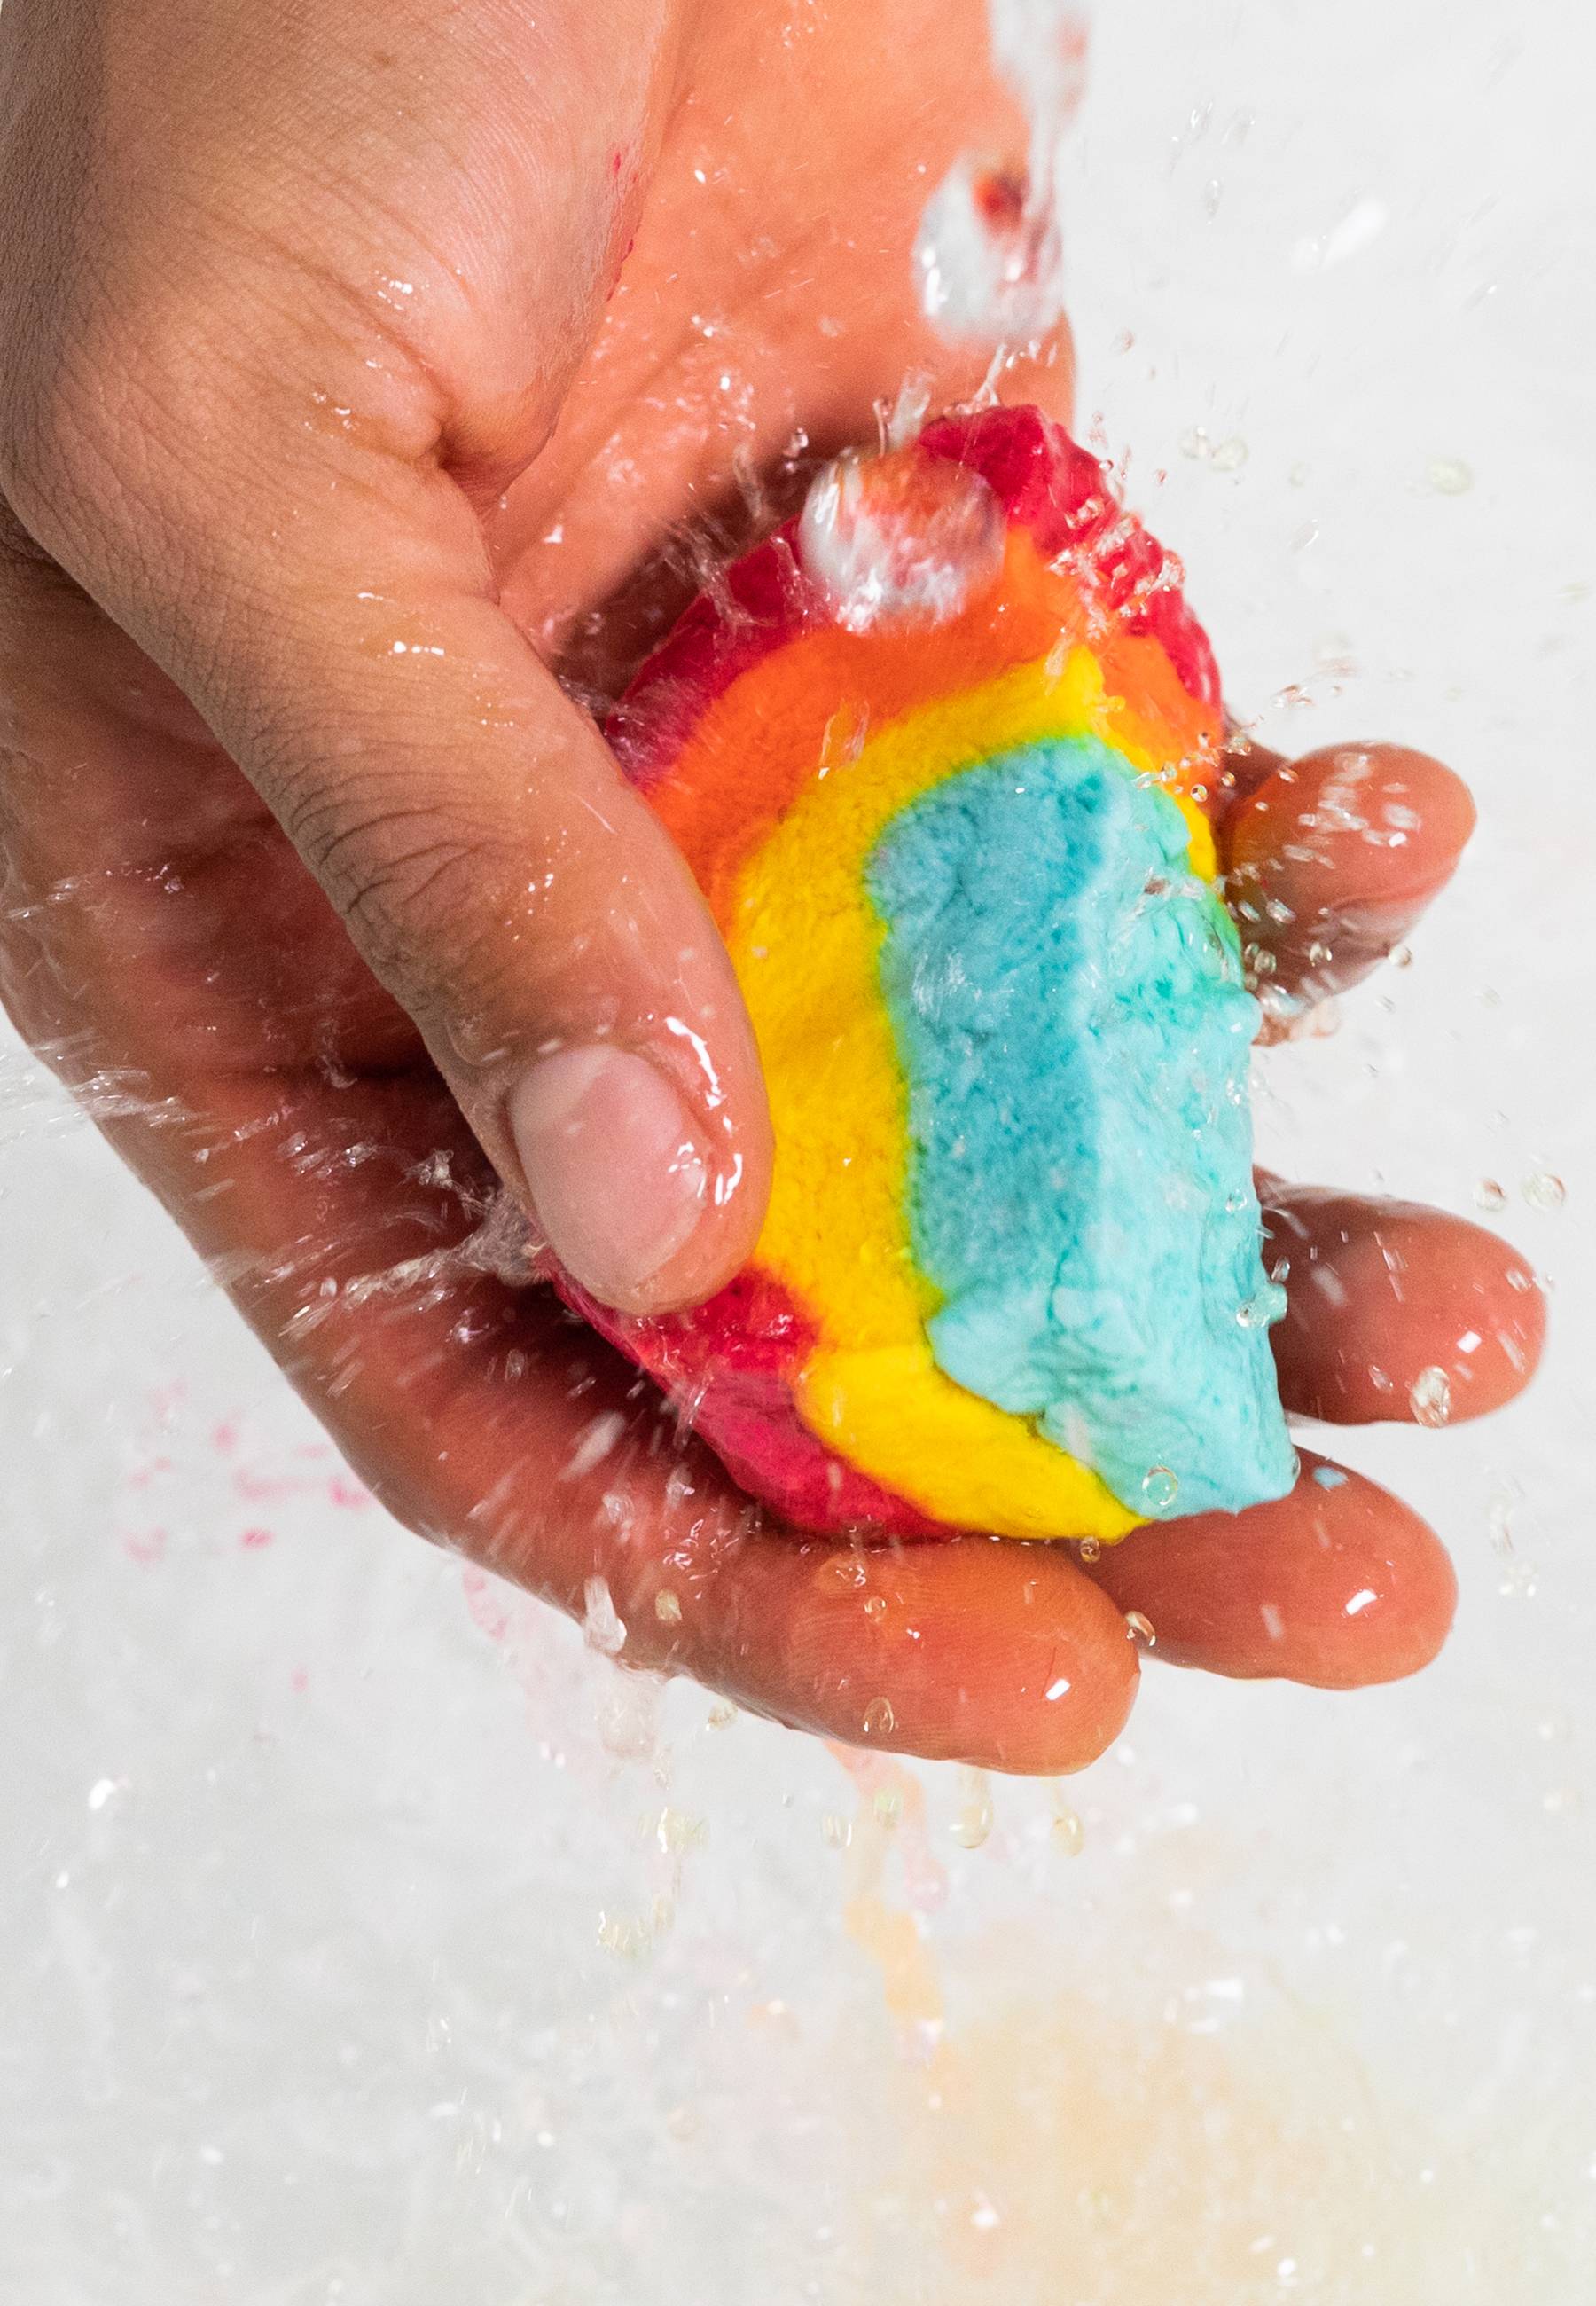 A close-up of the model's hand gently crumbling the Mini Rainbow bubble bar under running water creating thick, foamy bubbles below. 